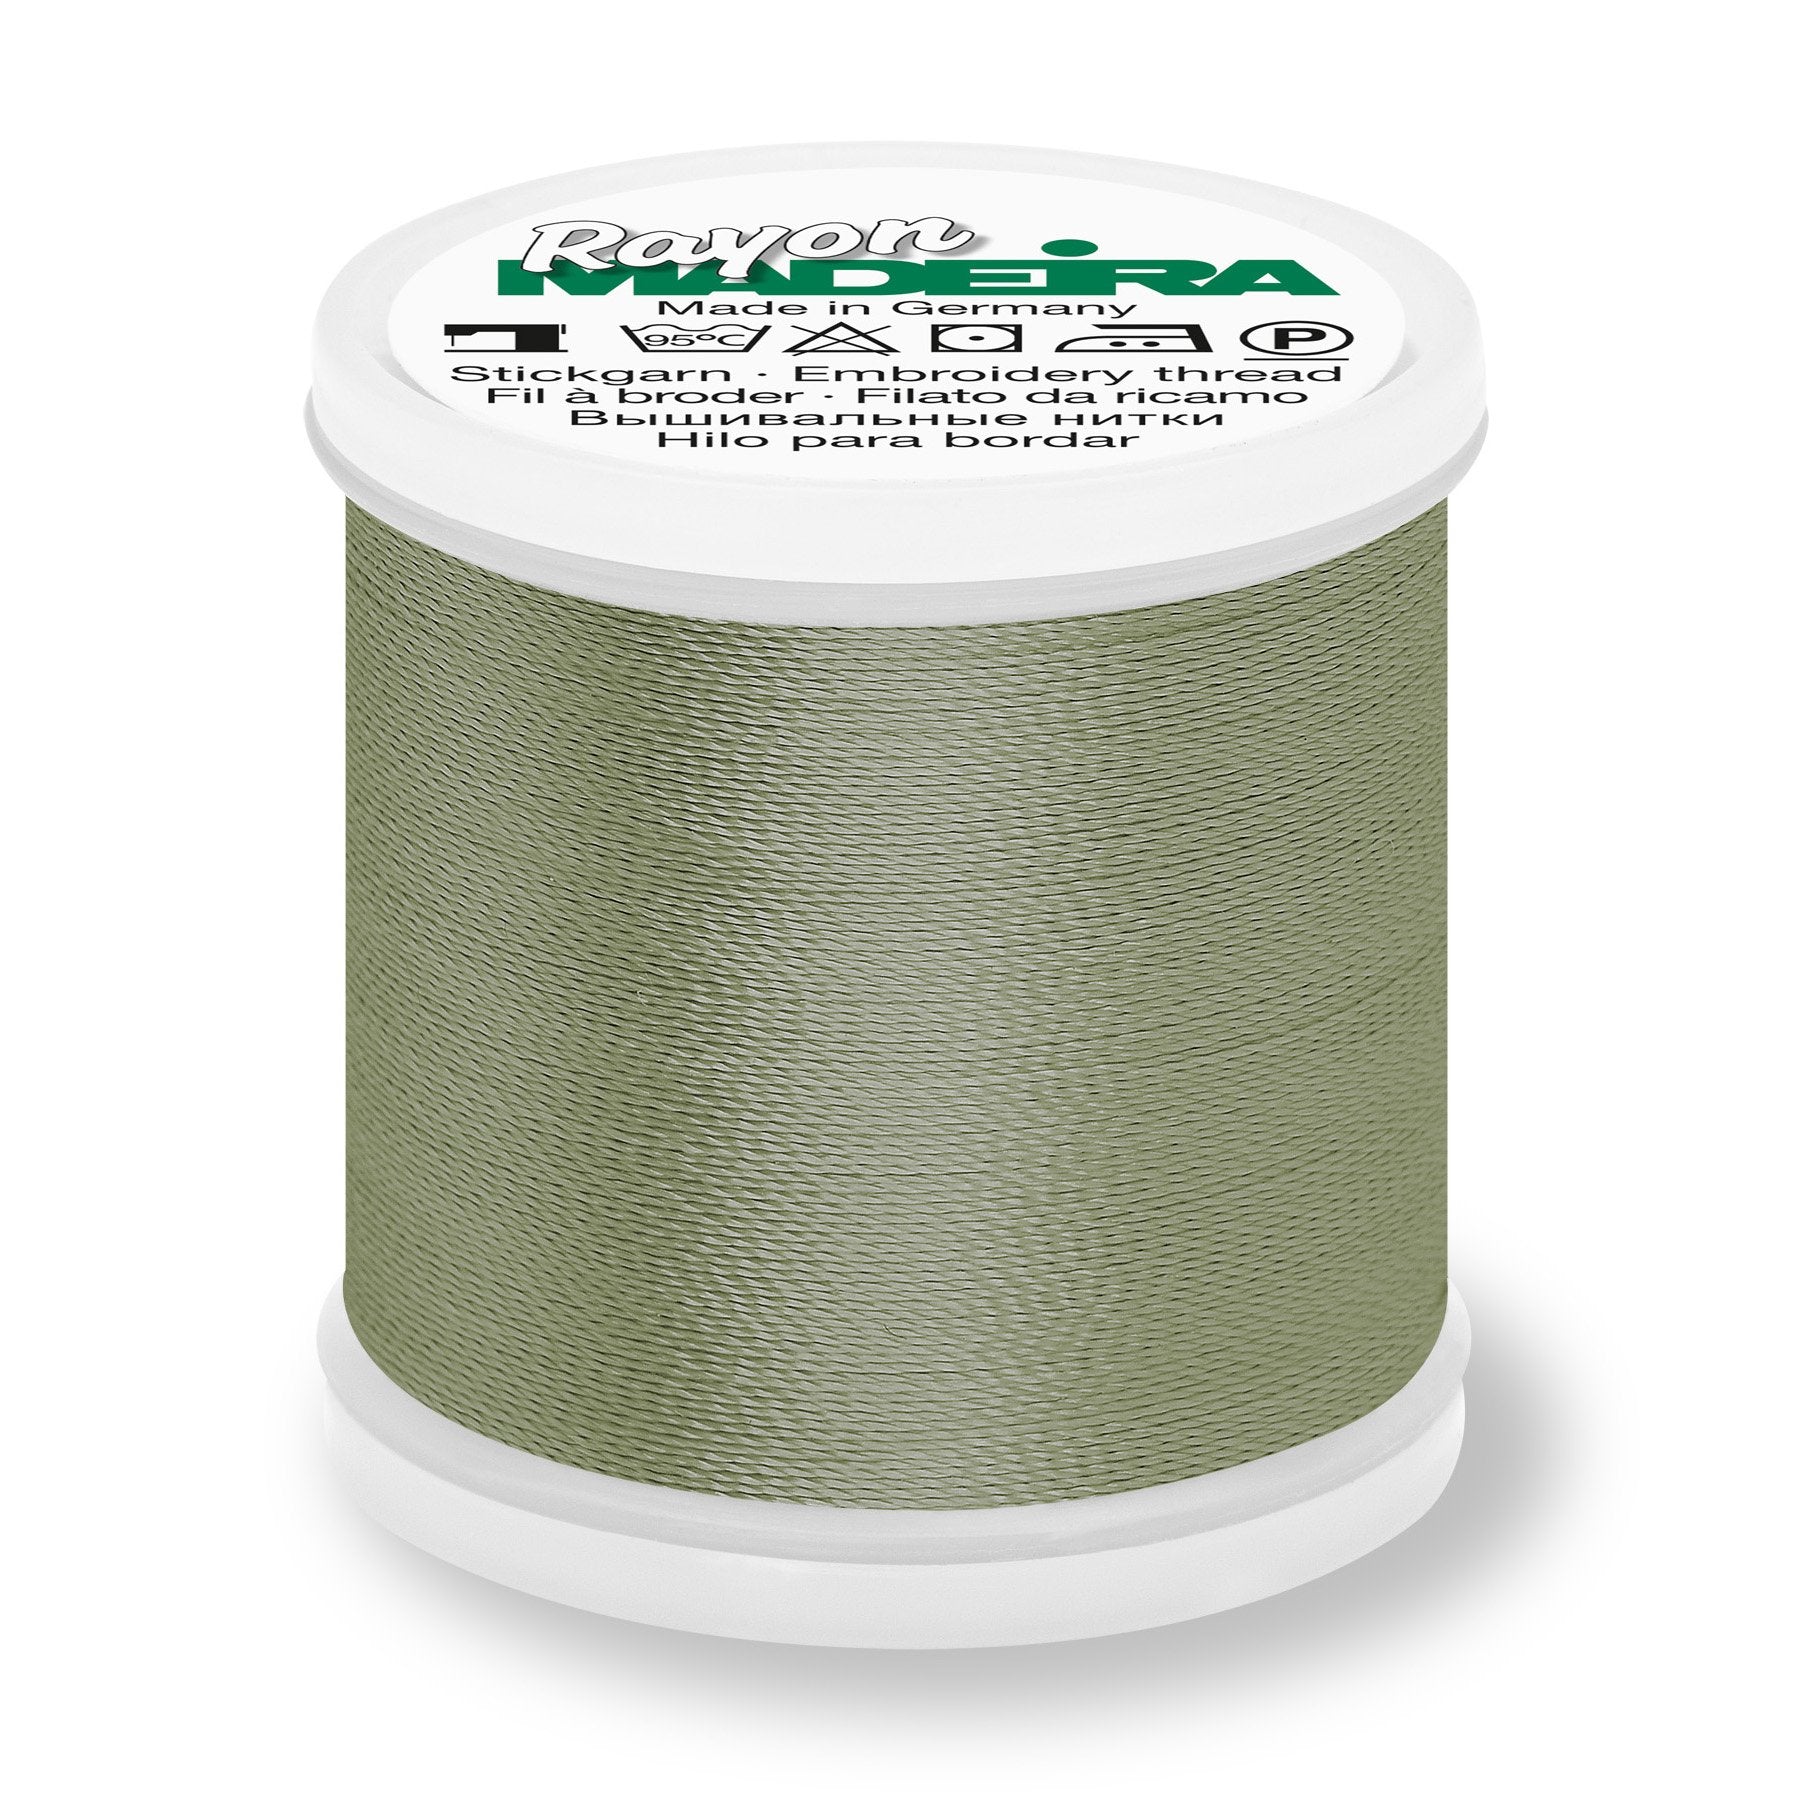 Madeira Rayon 40 Embroidery Thread 200m #1306 Light Khaki from Jaycotts Sewing Supplies